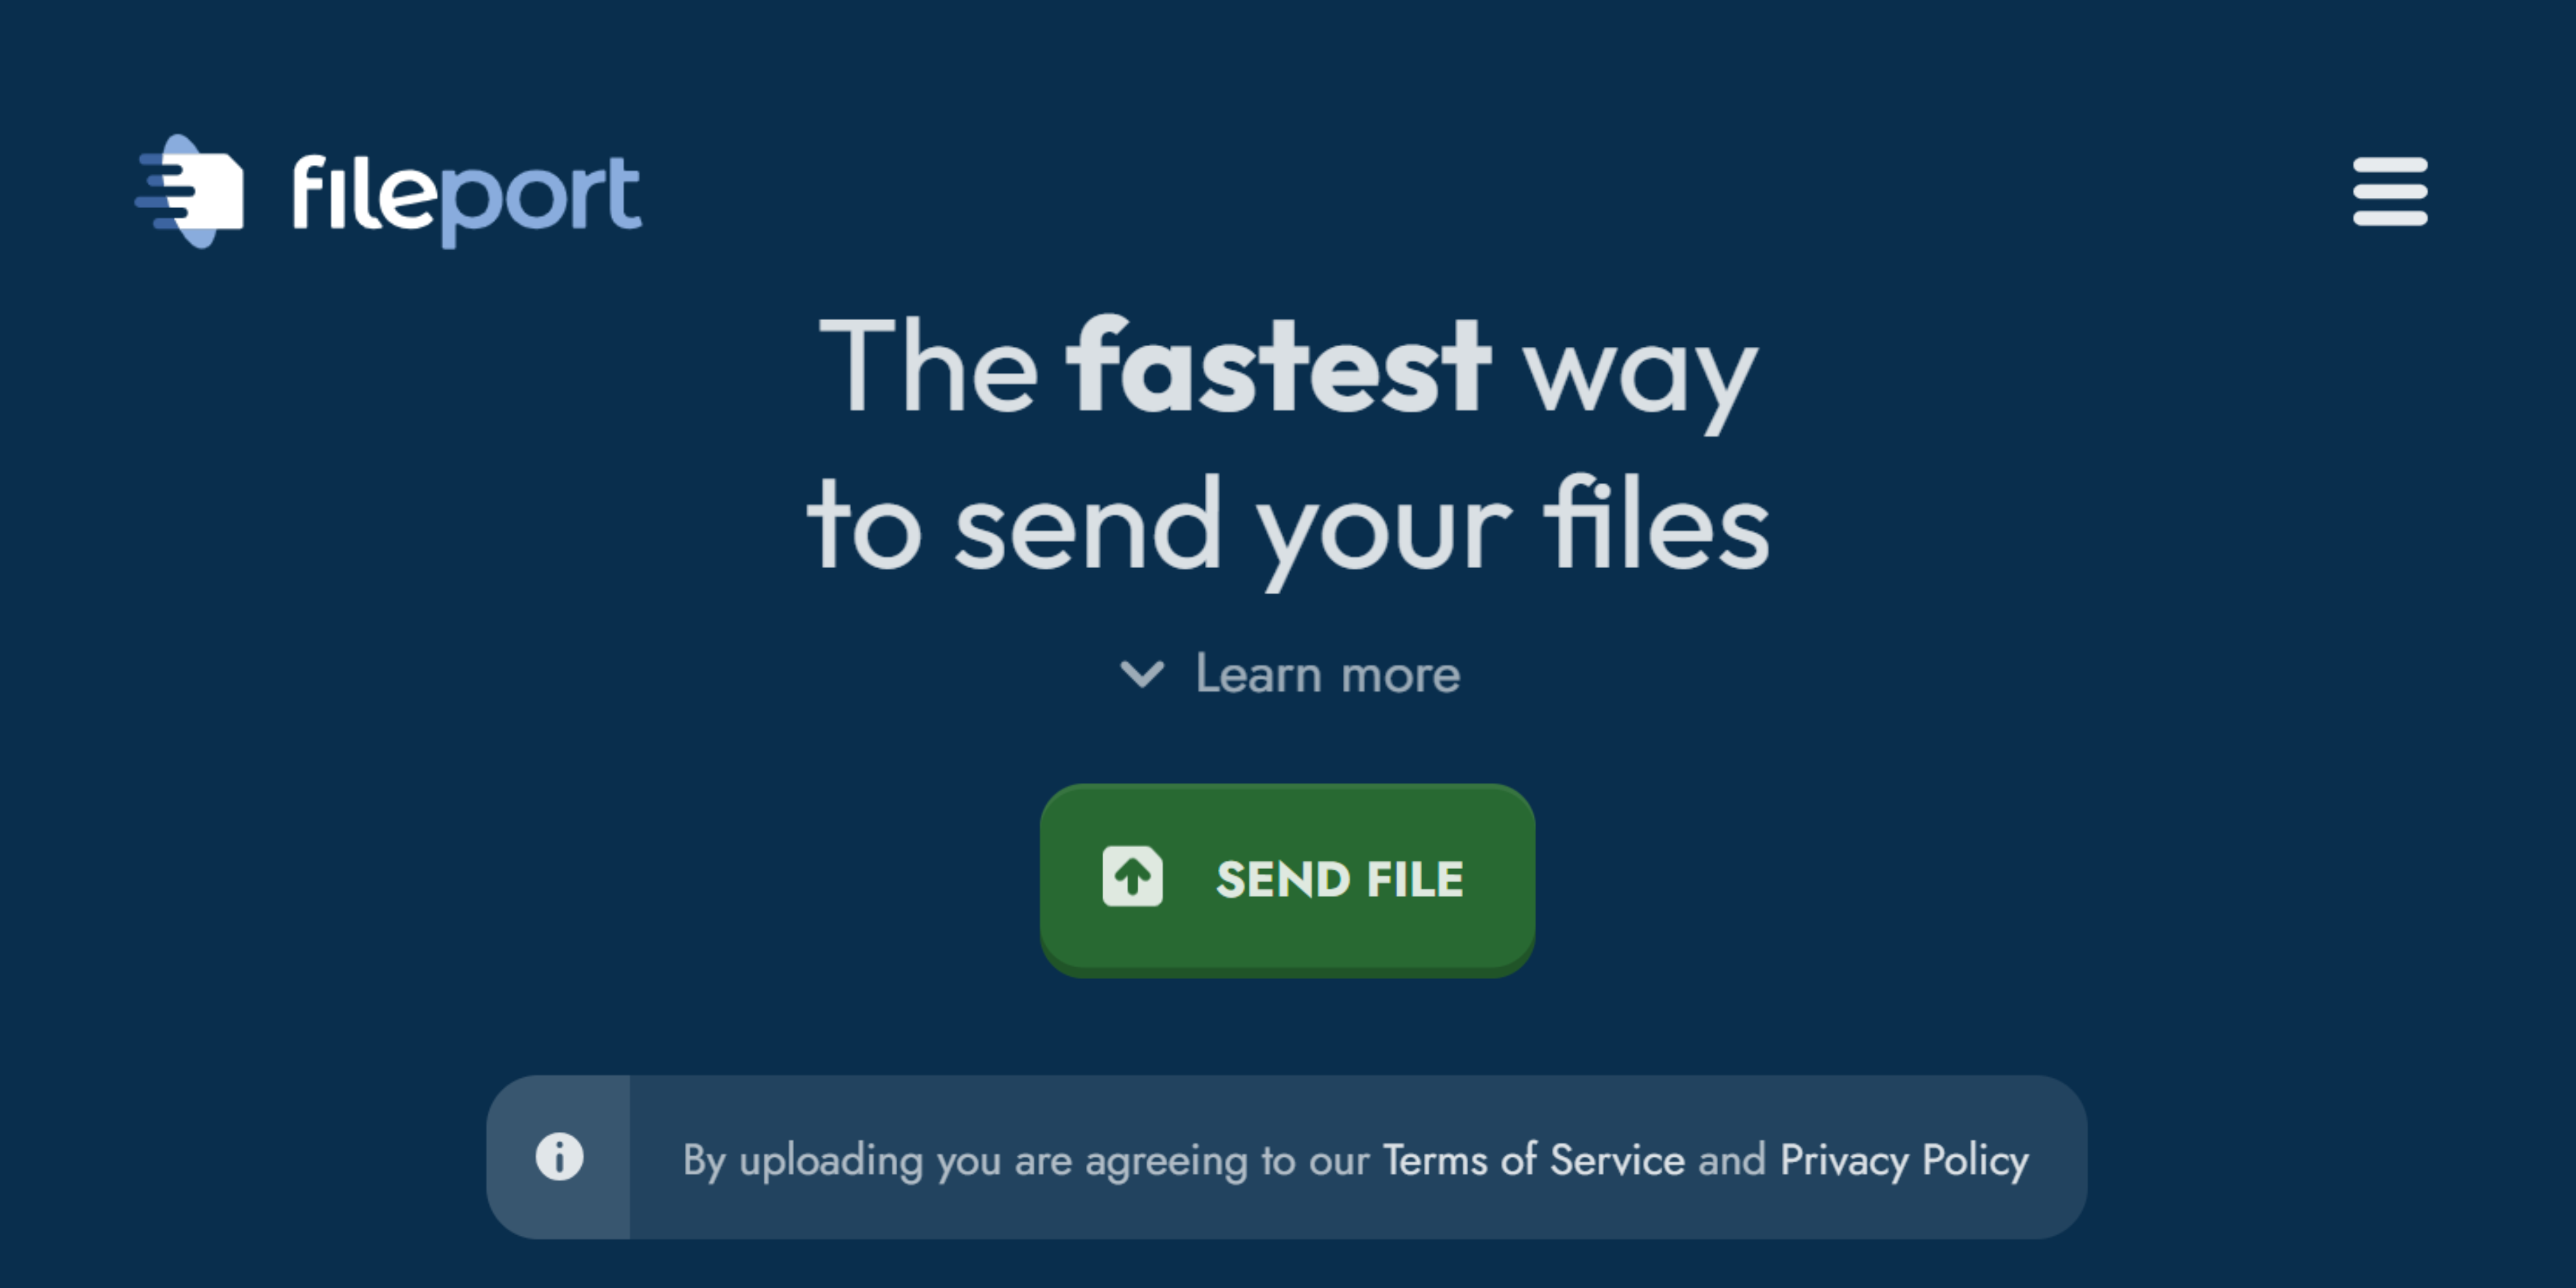 Fileport Launched Innovative File Transfer Platform for Seamless Sharing